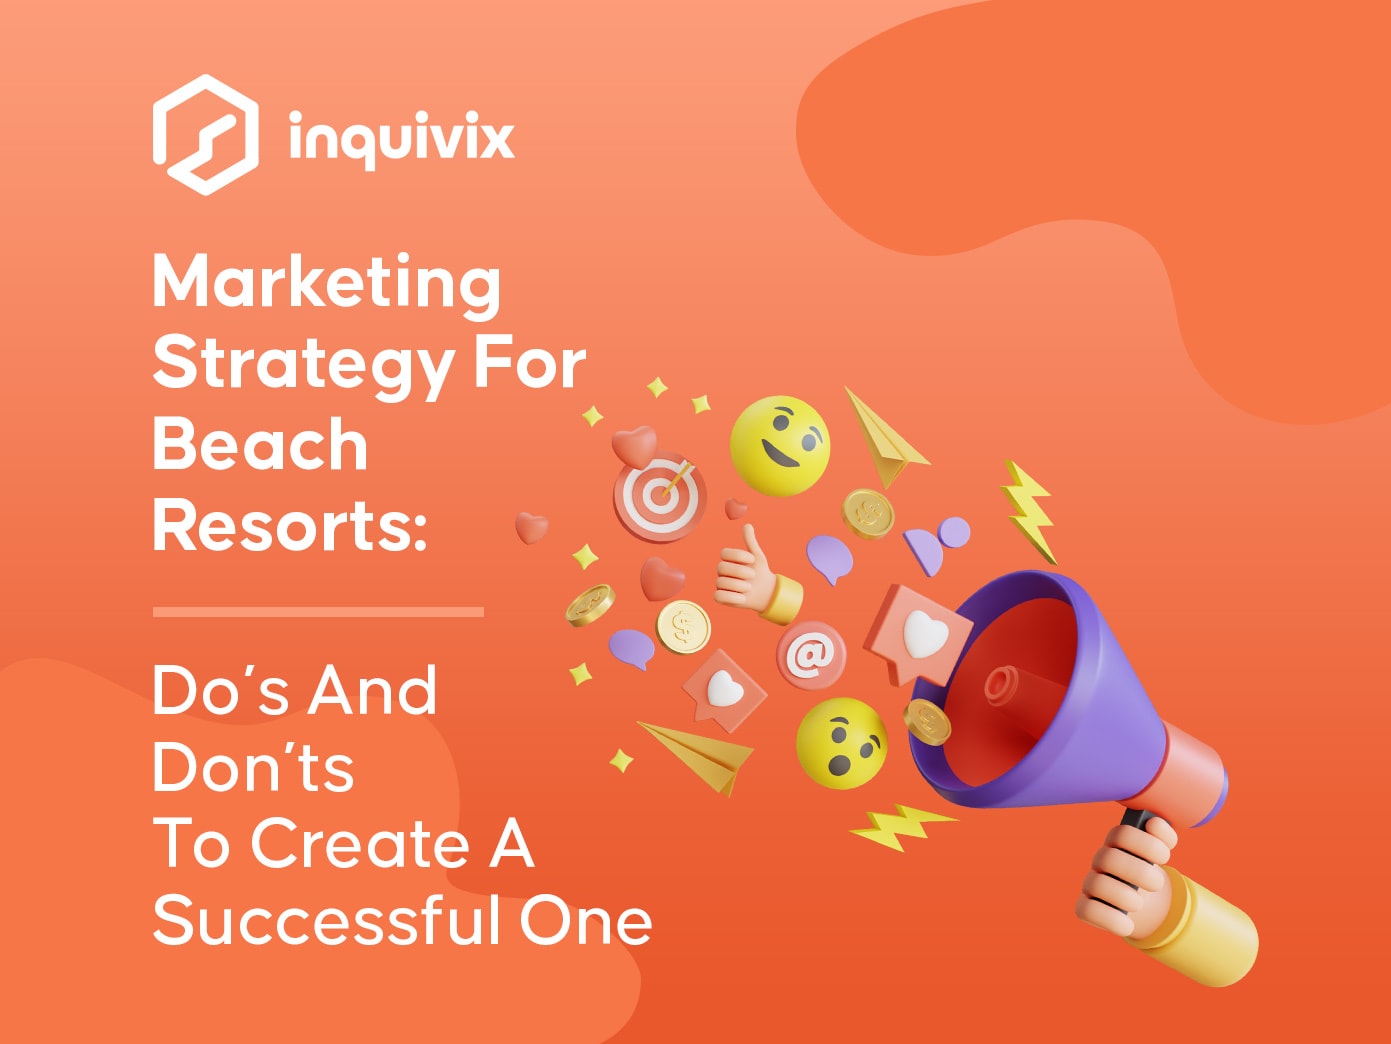 Marketing Strategy For Beach Resorts Do’s And Don’ts To Create A Successful One | INQUIVIX